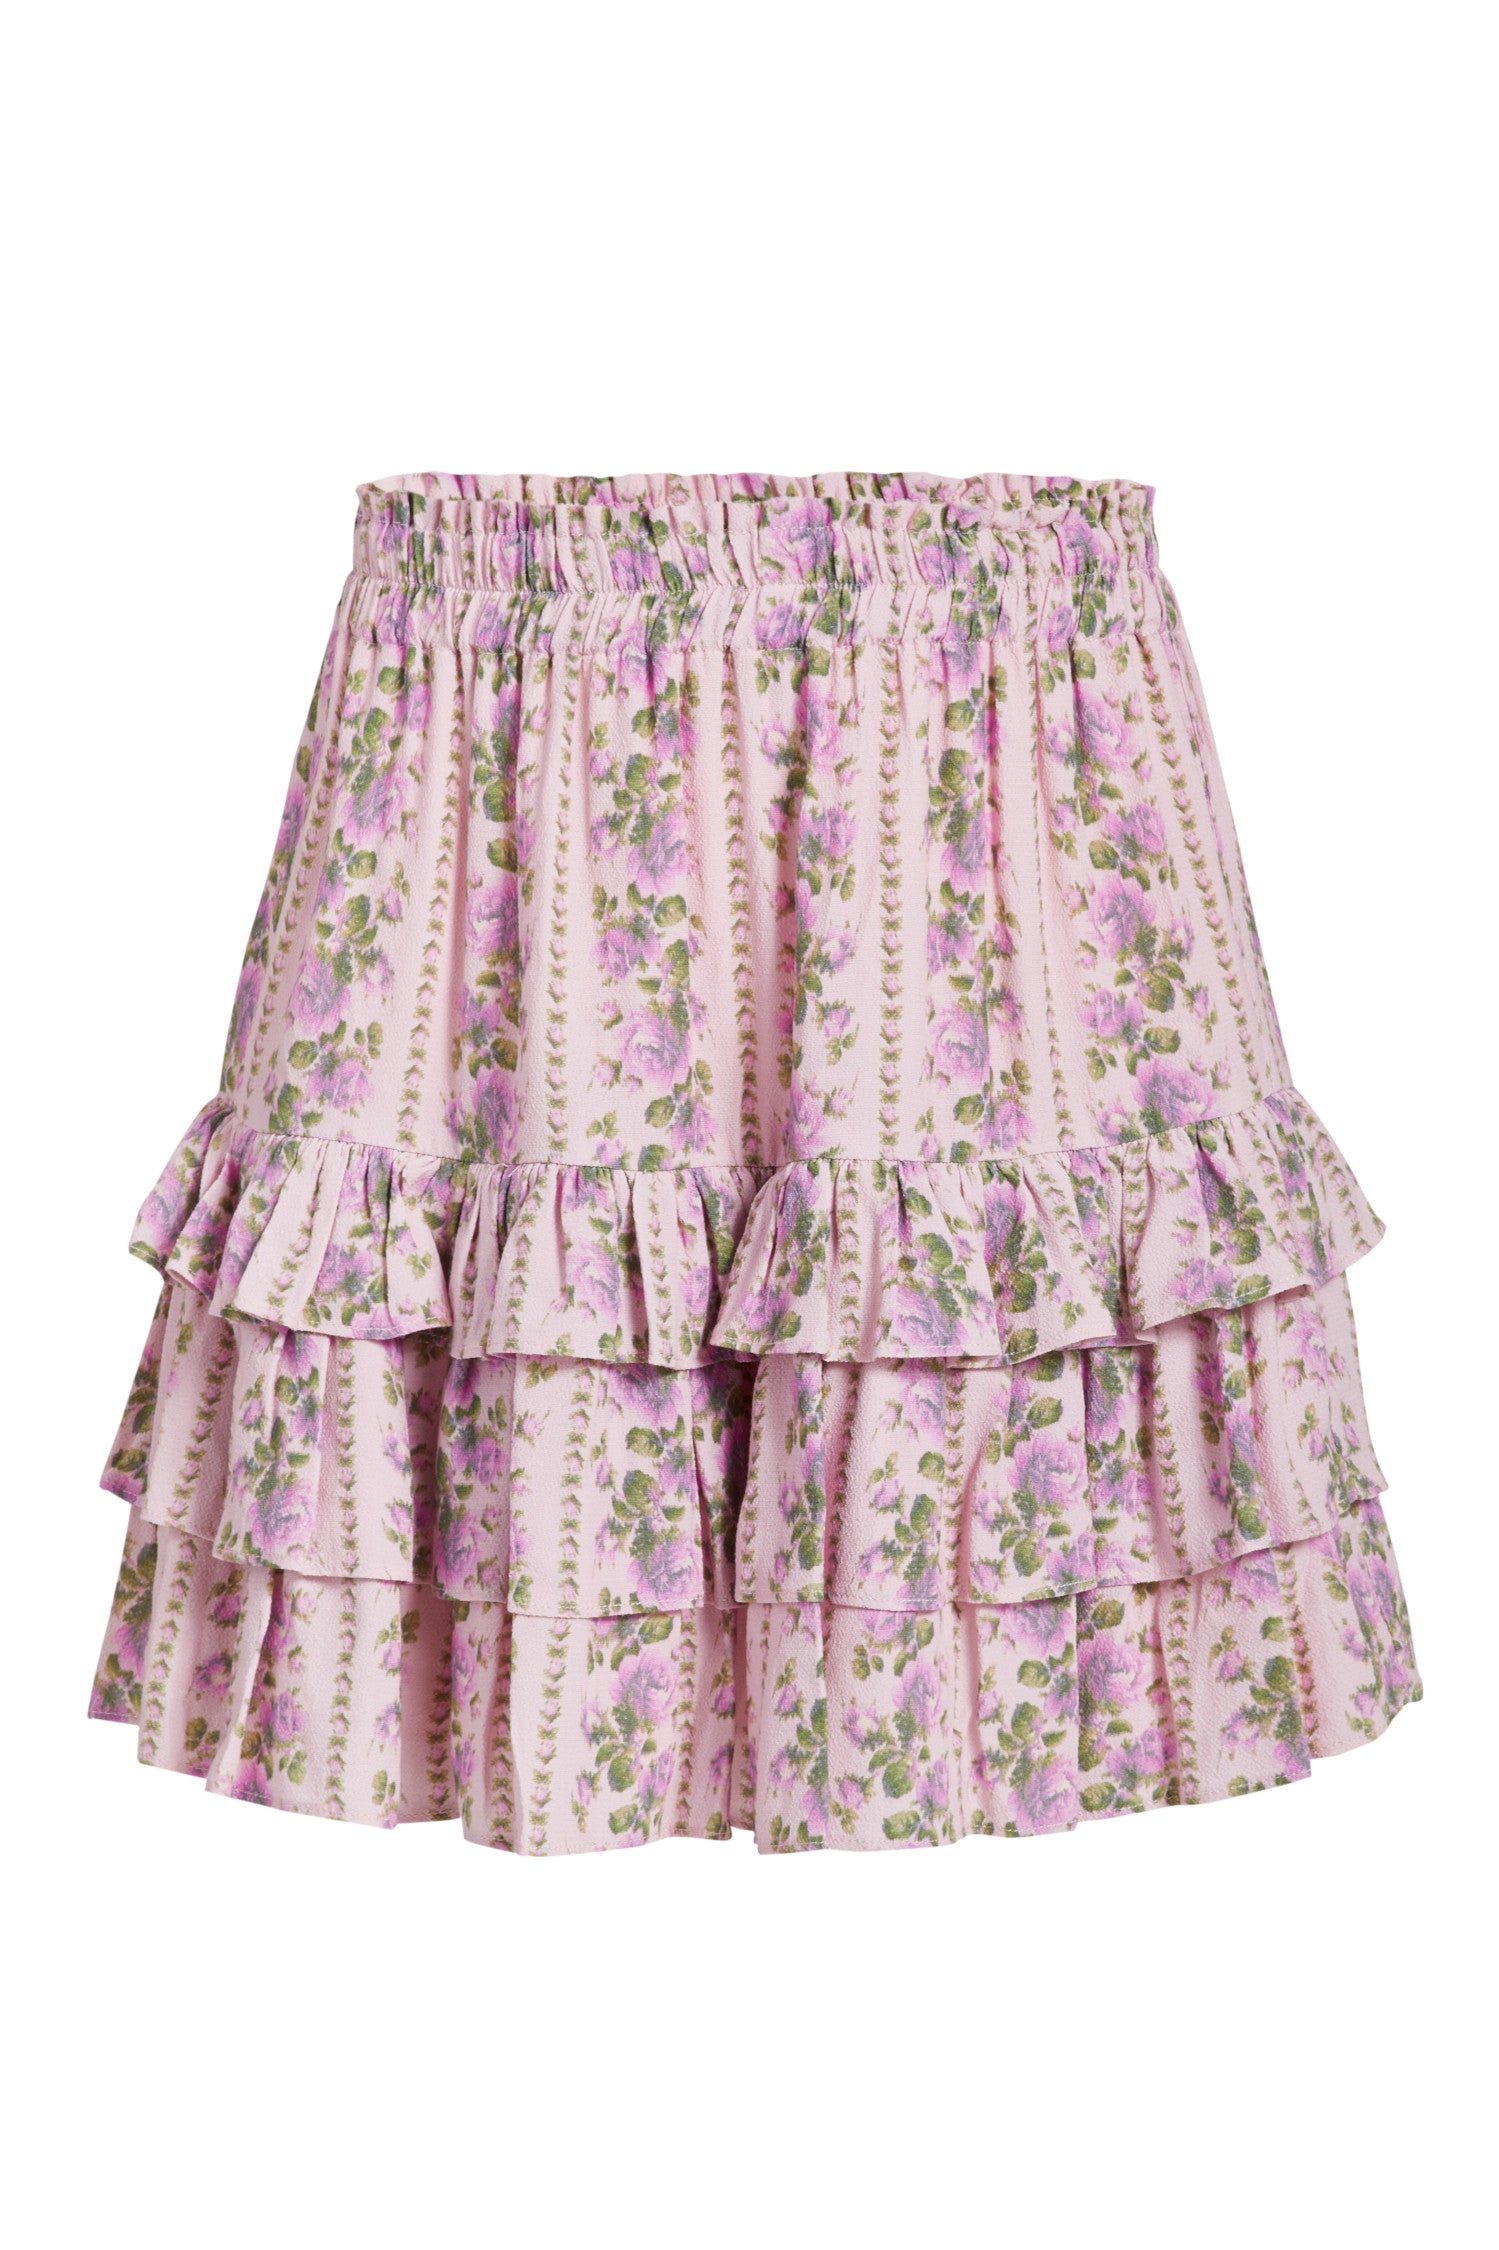 Pink floral mini skirt with crepe fabric, easy shape, elastic waist, and flirty ruffle tiers. 